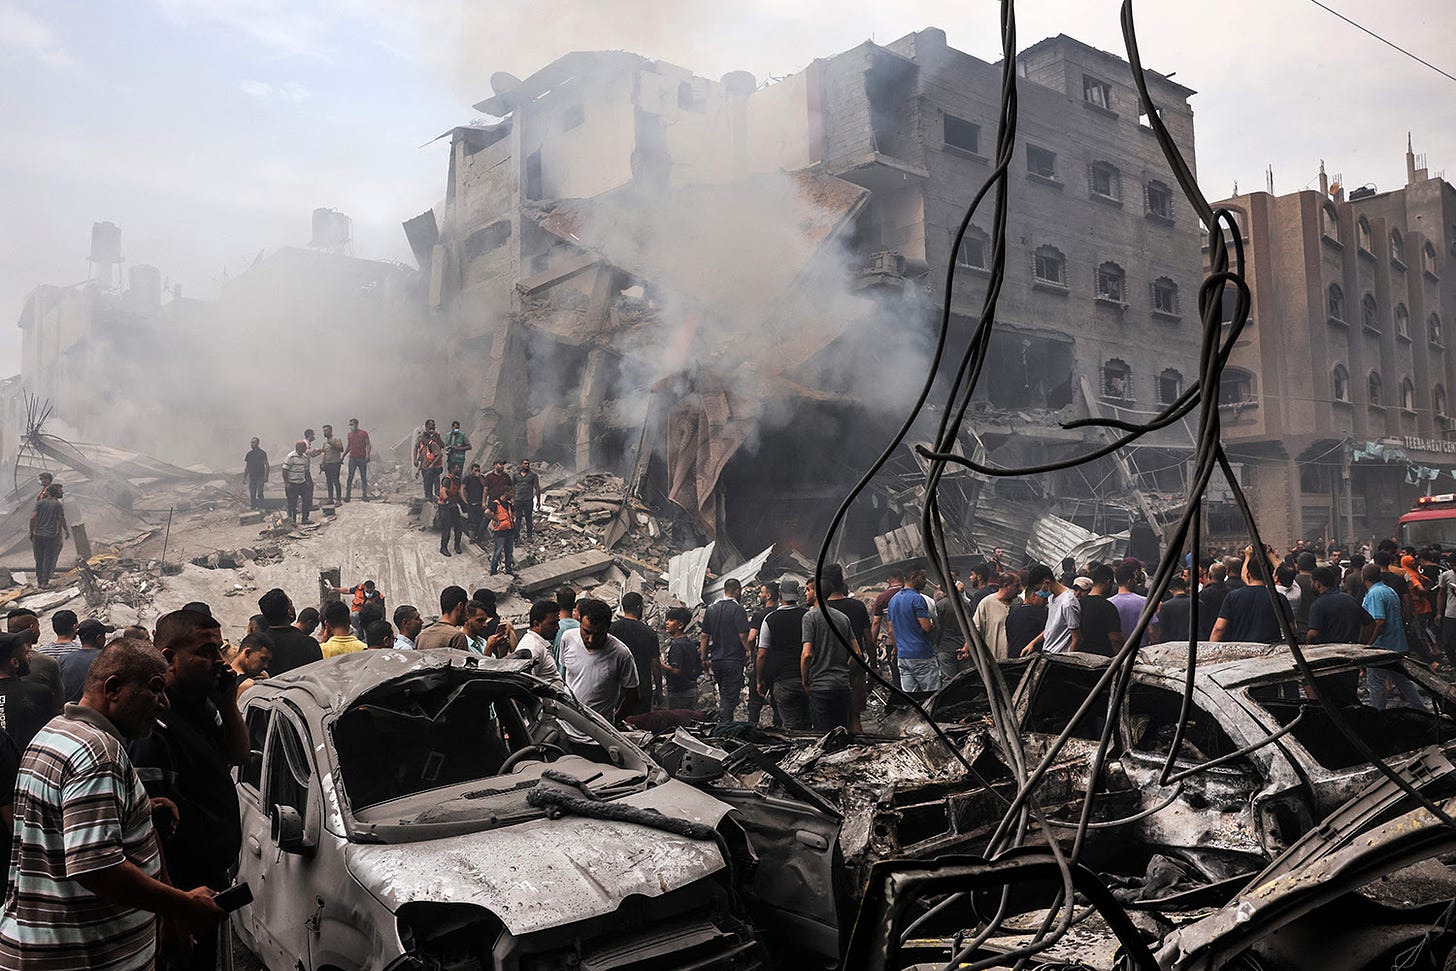 Smoke rises from damaged buildings as Palestinians search for survivors in the Gaza Strip.